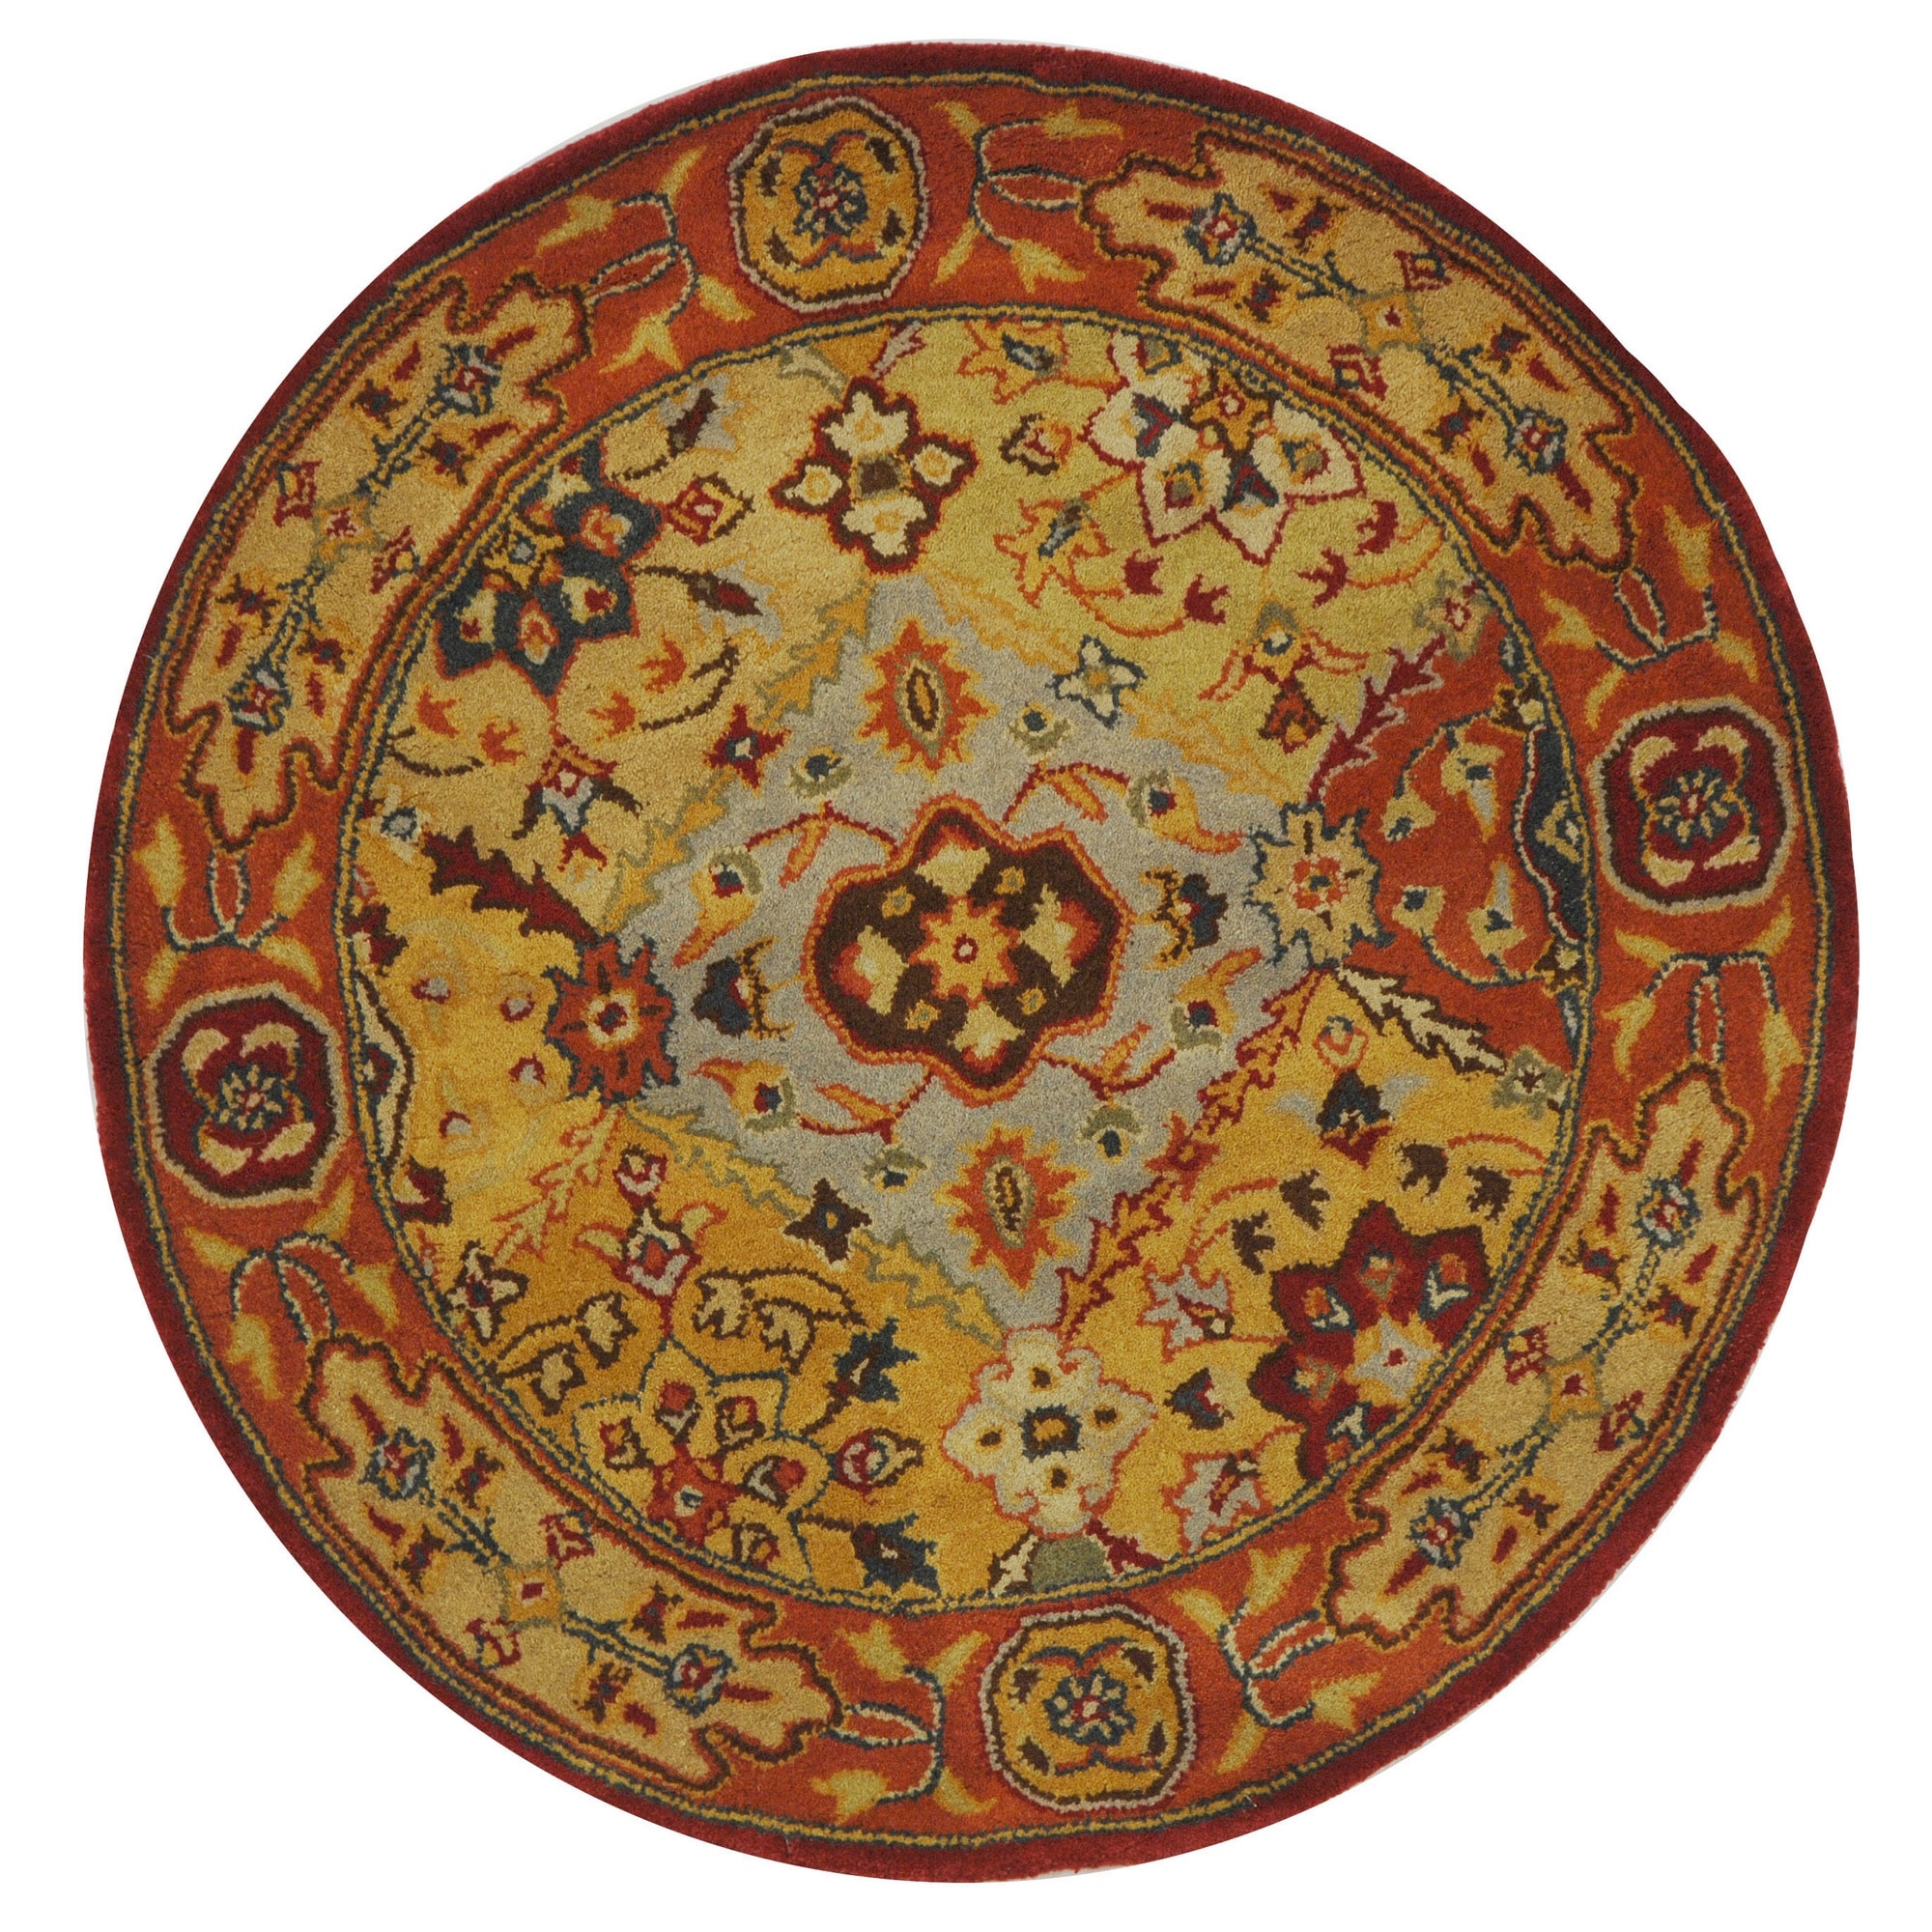 Handmade Diamond Bakhtiari Multi/ Red Wool Rug (36 Round) (MultiPattern OrientalMeasures 0.625 inch thickTip We recommend the use of a non skid pad to keep the rug in place on smooth surfaces. We also recommend that this rug be professionally cleaned to